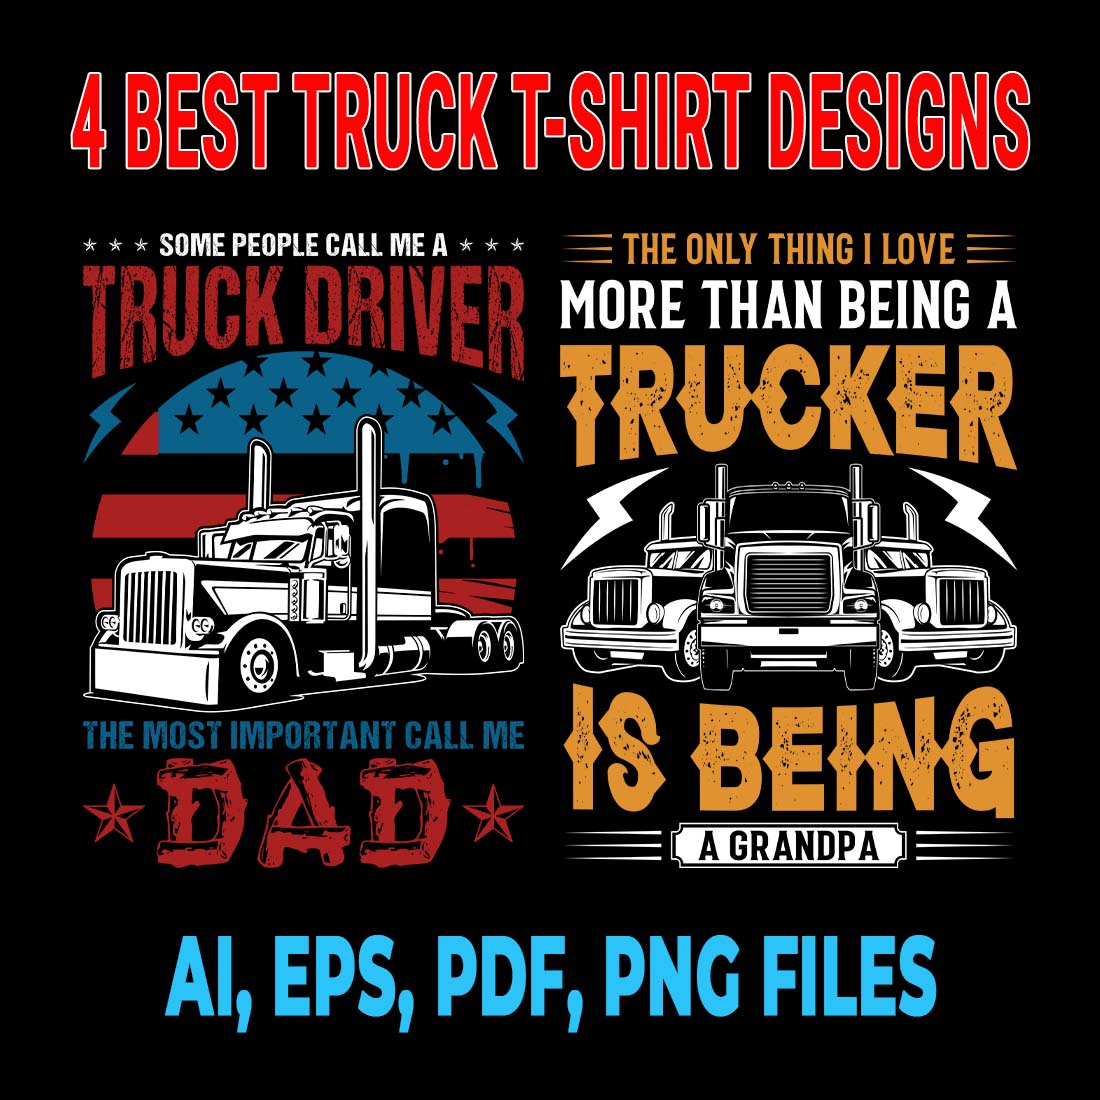 Truck T-shirt Design | Truck T-Shirt | T-shirt Design | Best Truck T-shirt cover image.